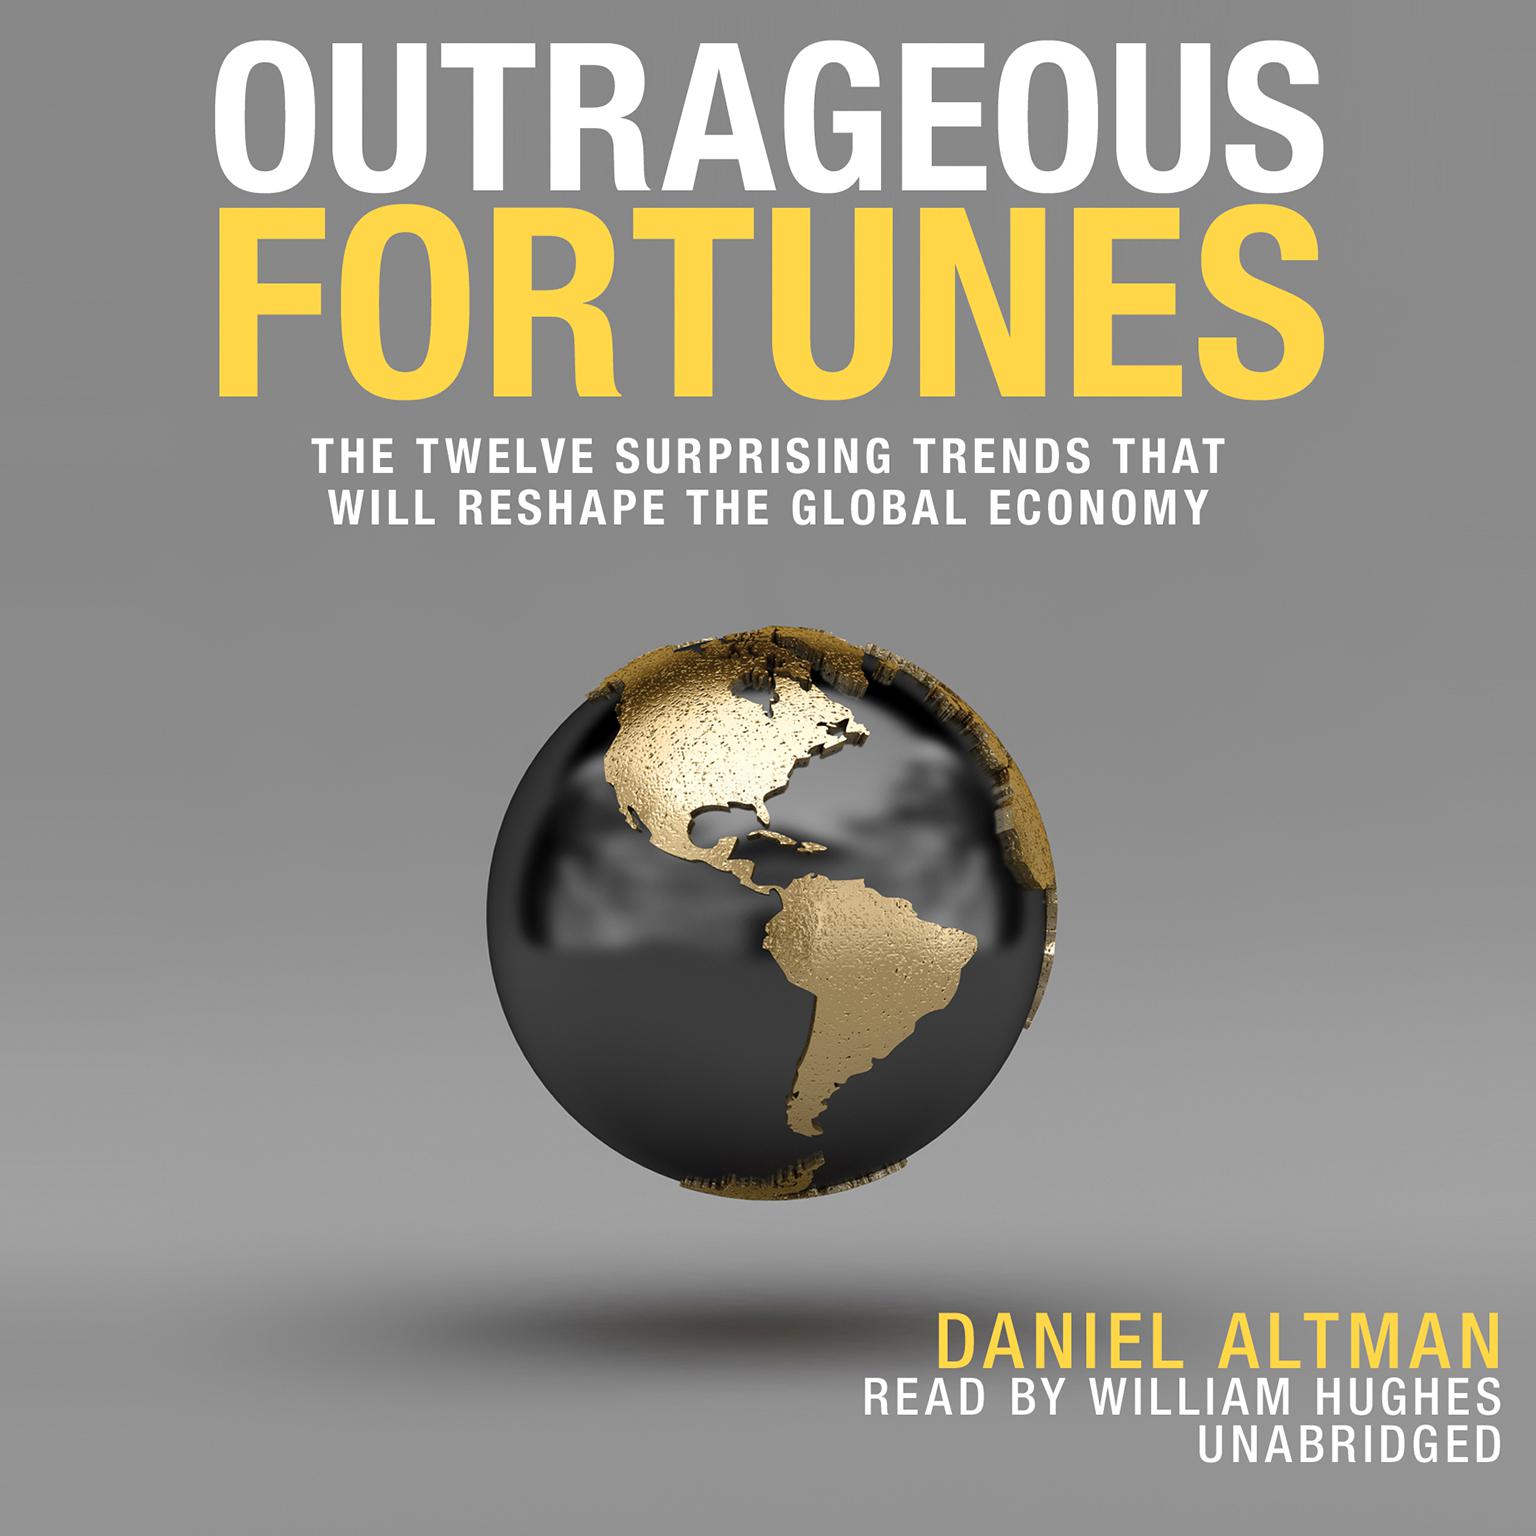 Outrageous Fortunes: The Twelve Surprising Trends That Will Reshape the Global Economy Audiobook, by Daniel Altman